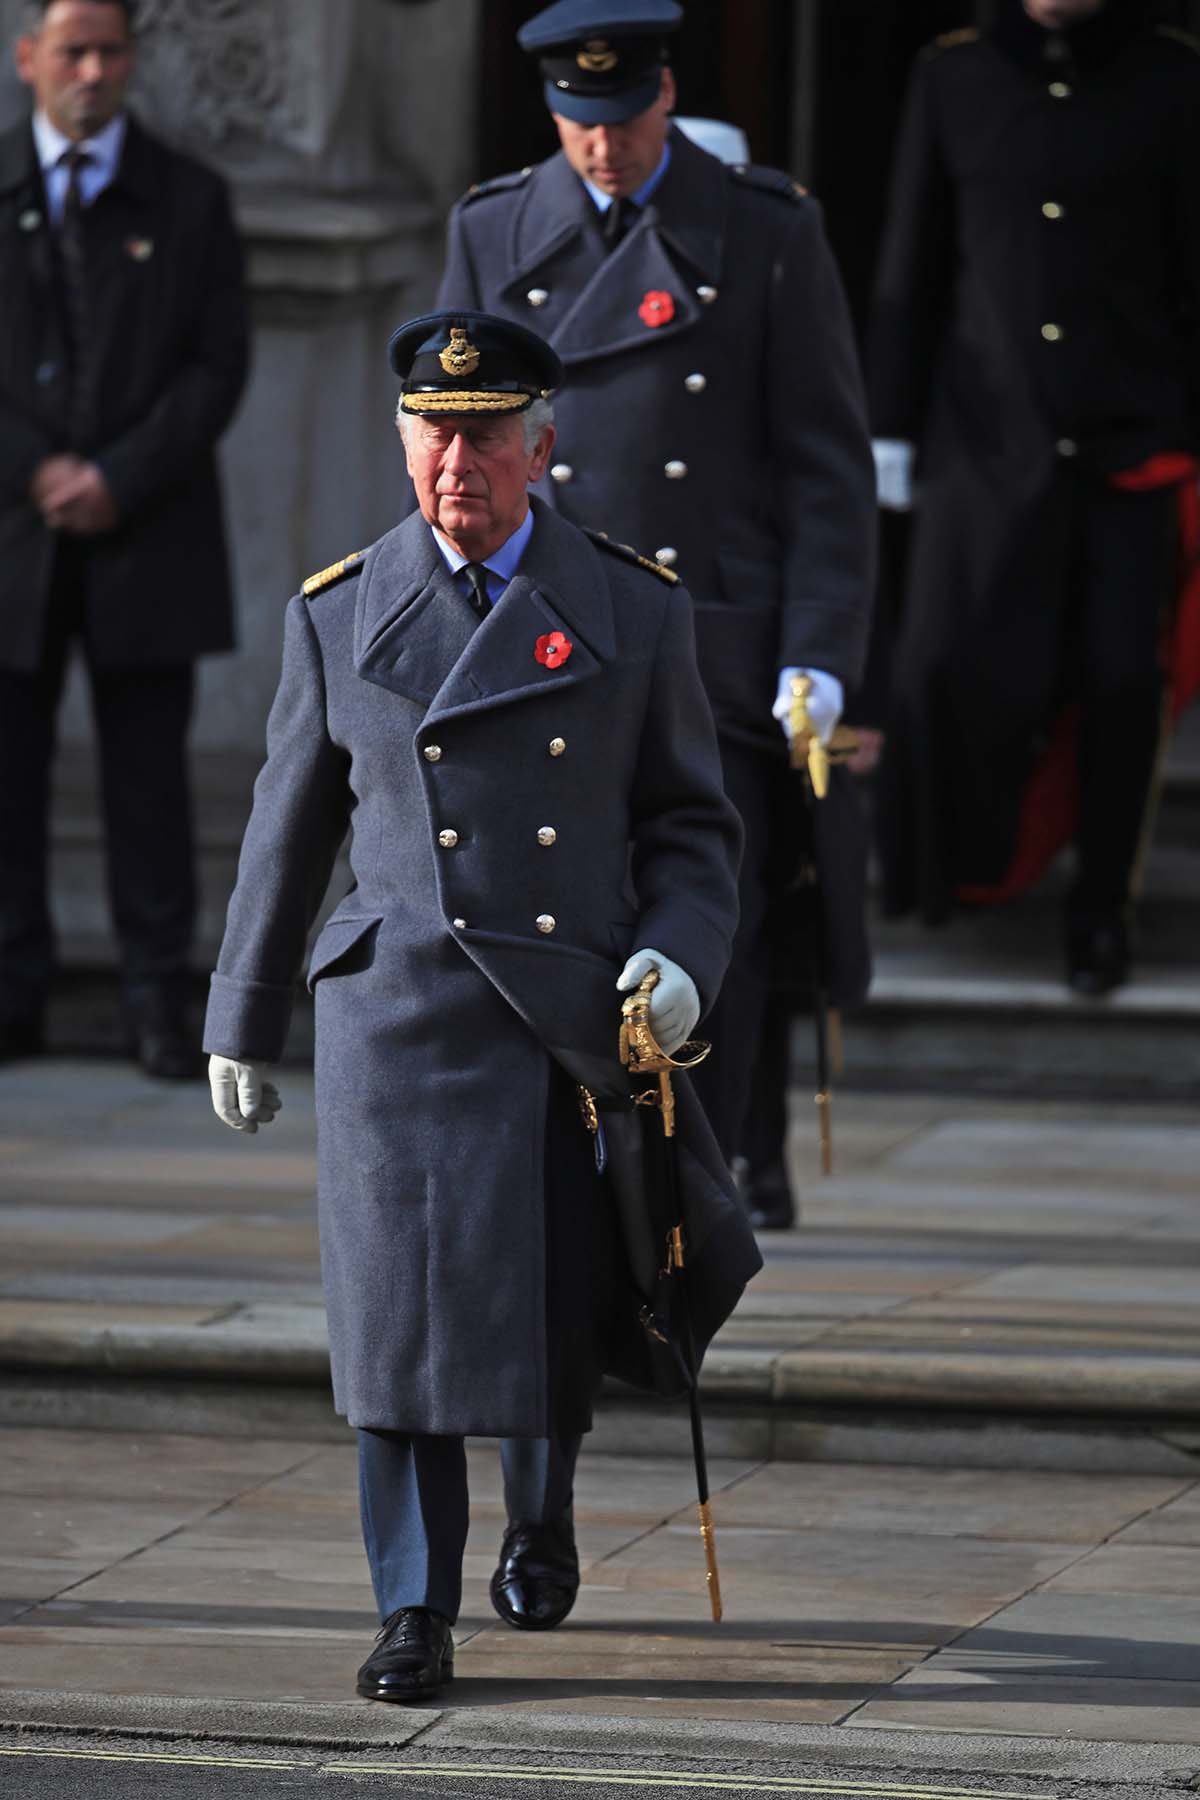 The Prince of Wales during the Remembrance Sunday service at the Cenotaph, in Whitehall, London.